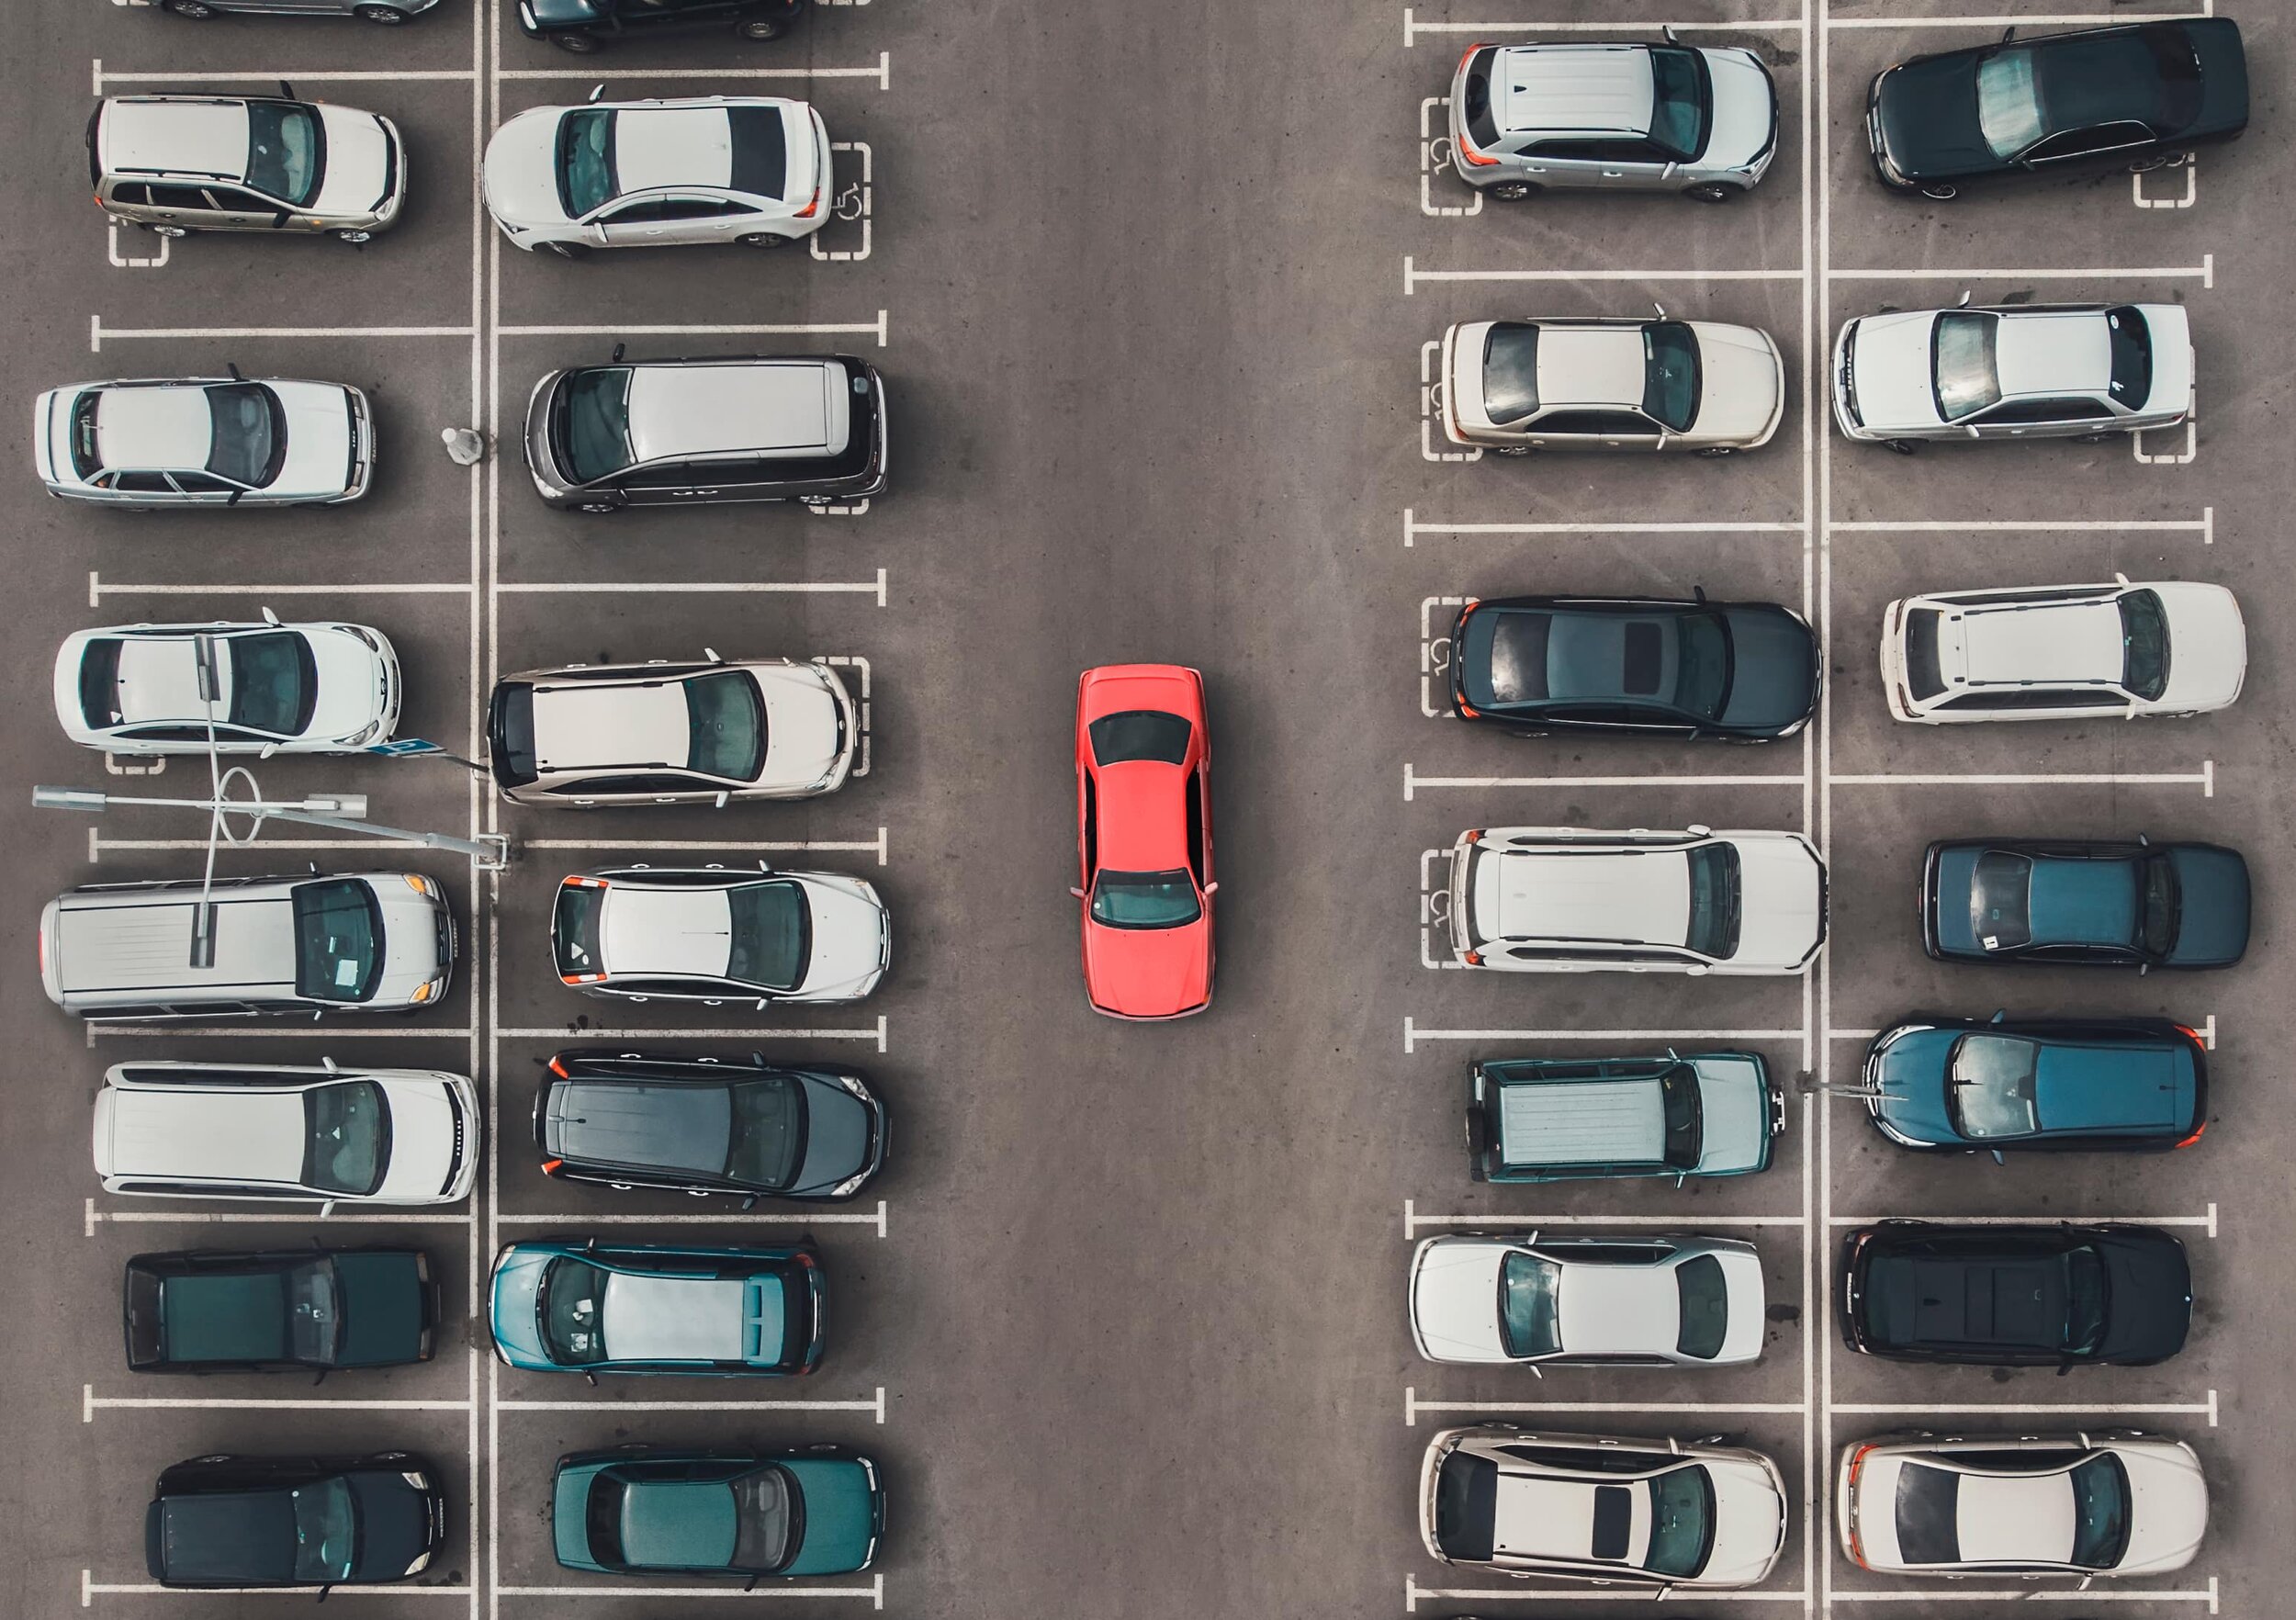 Transform the parking arrival experience — Cleverciti